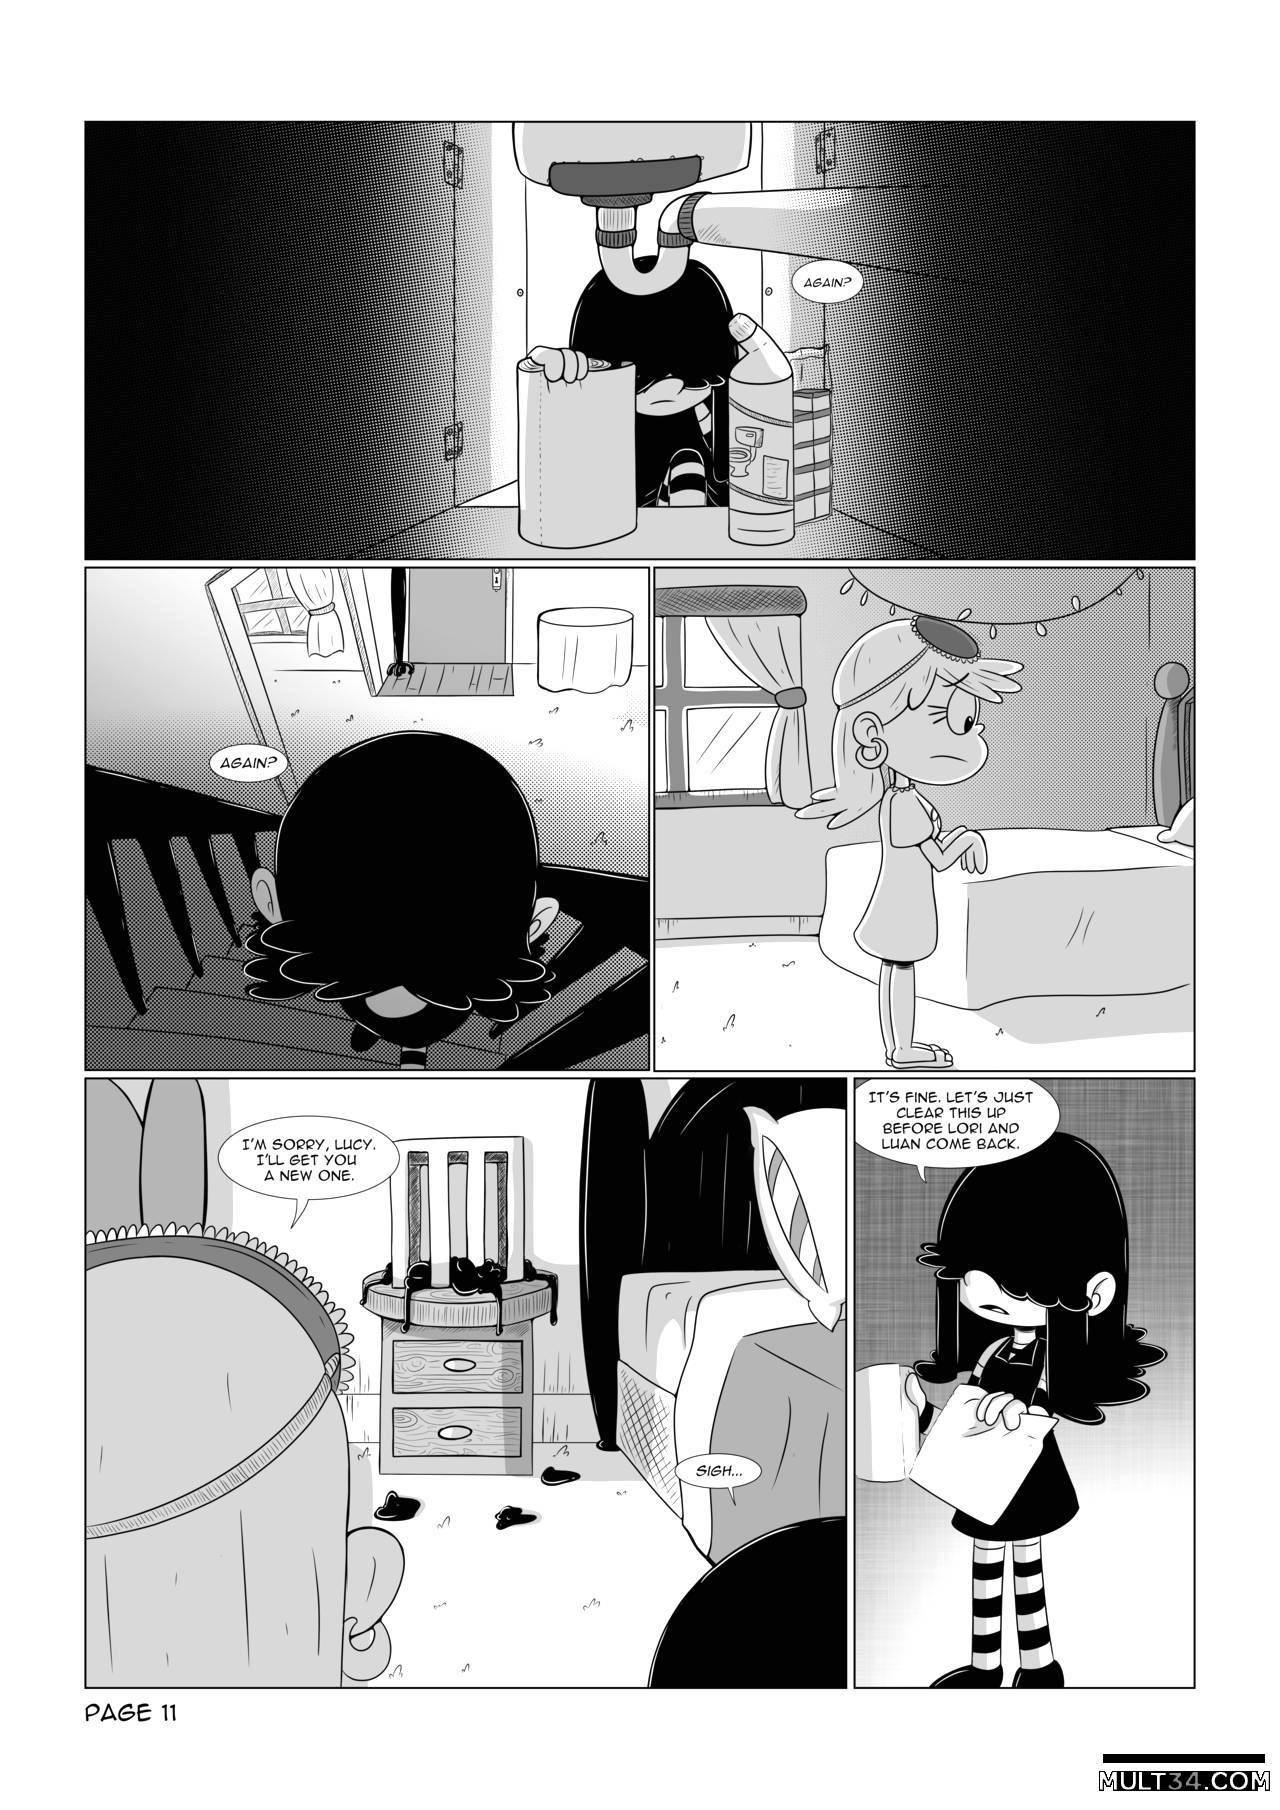 The loud house comic, chapter 3 page 12